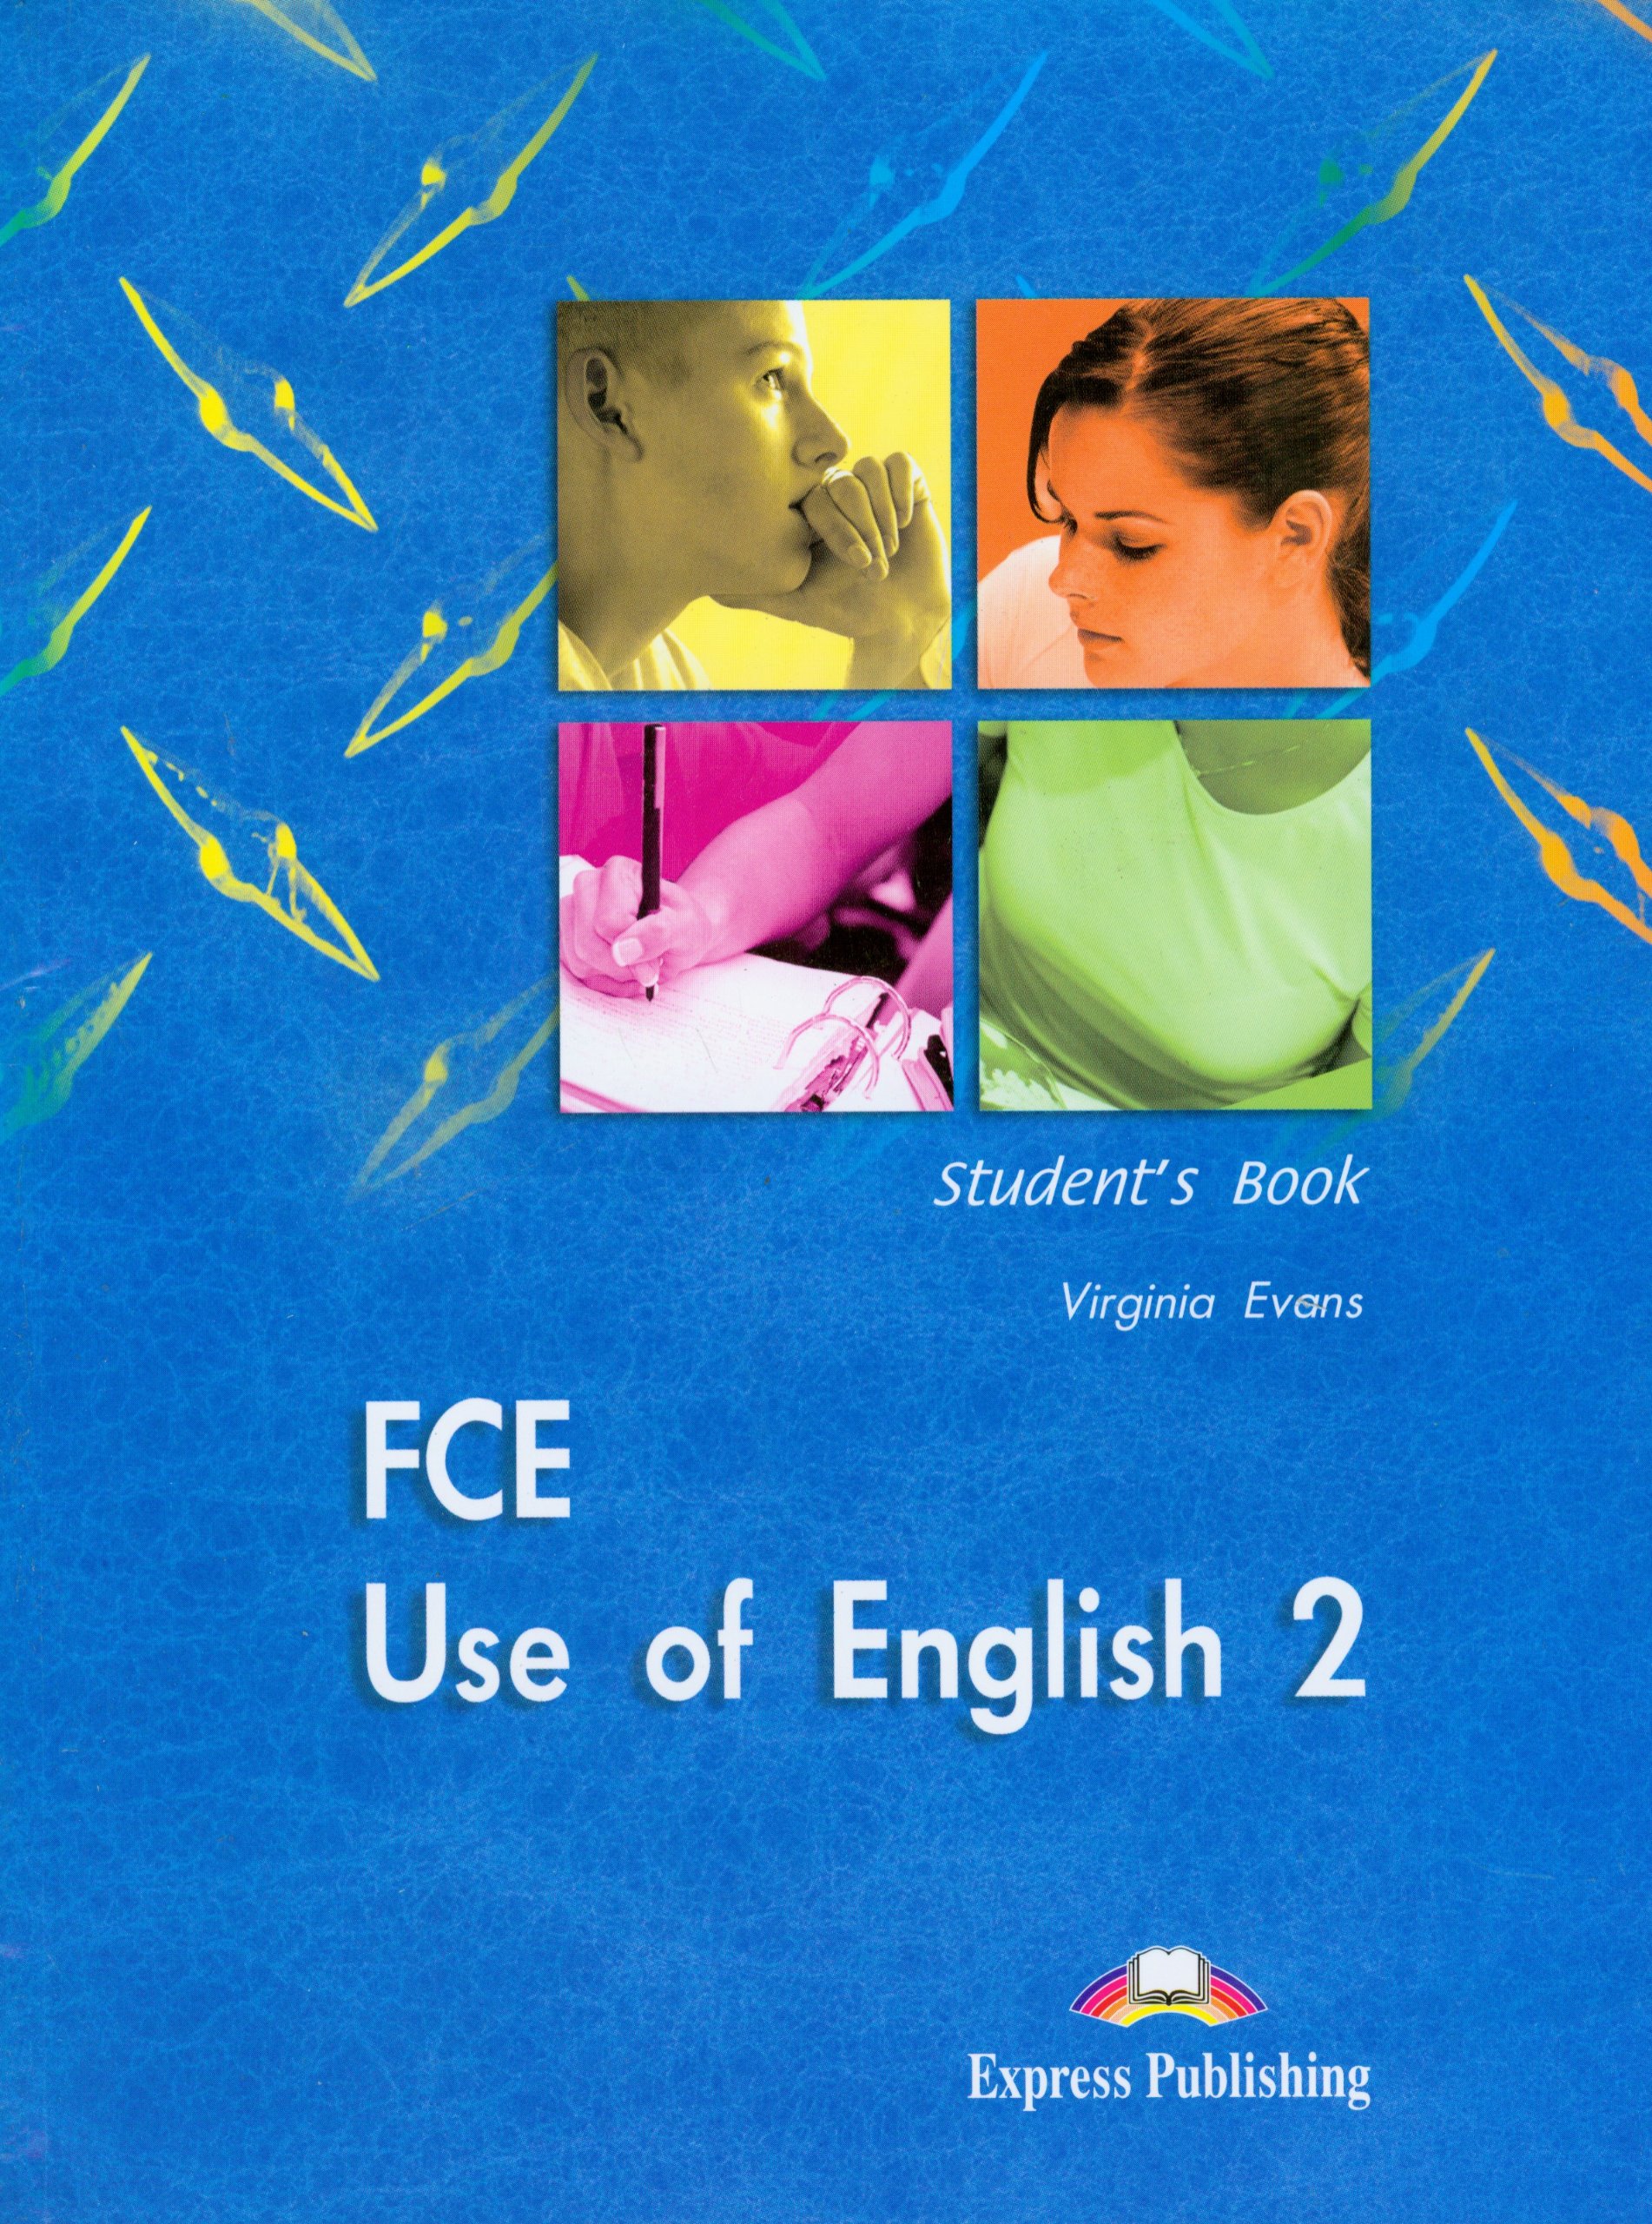 FCE USE OF ENGLISH 2 New ED Student's Book